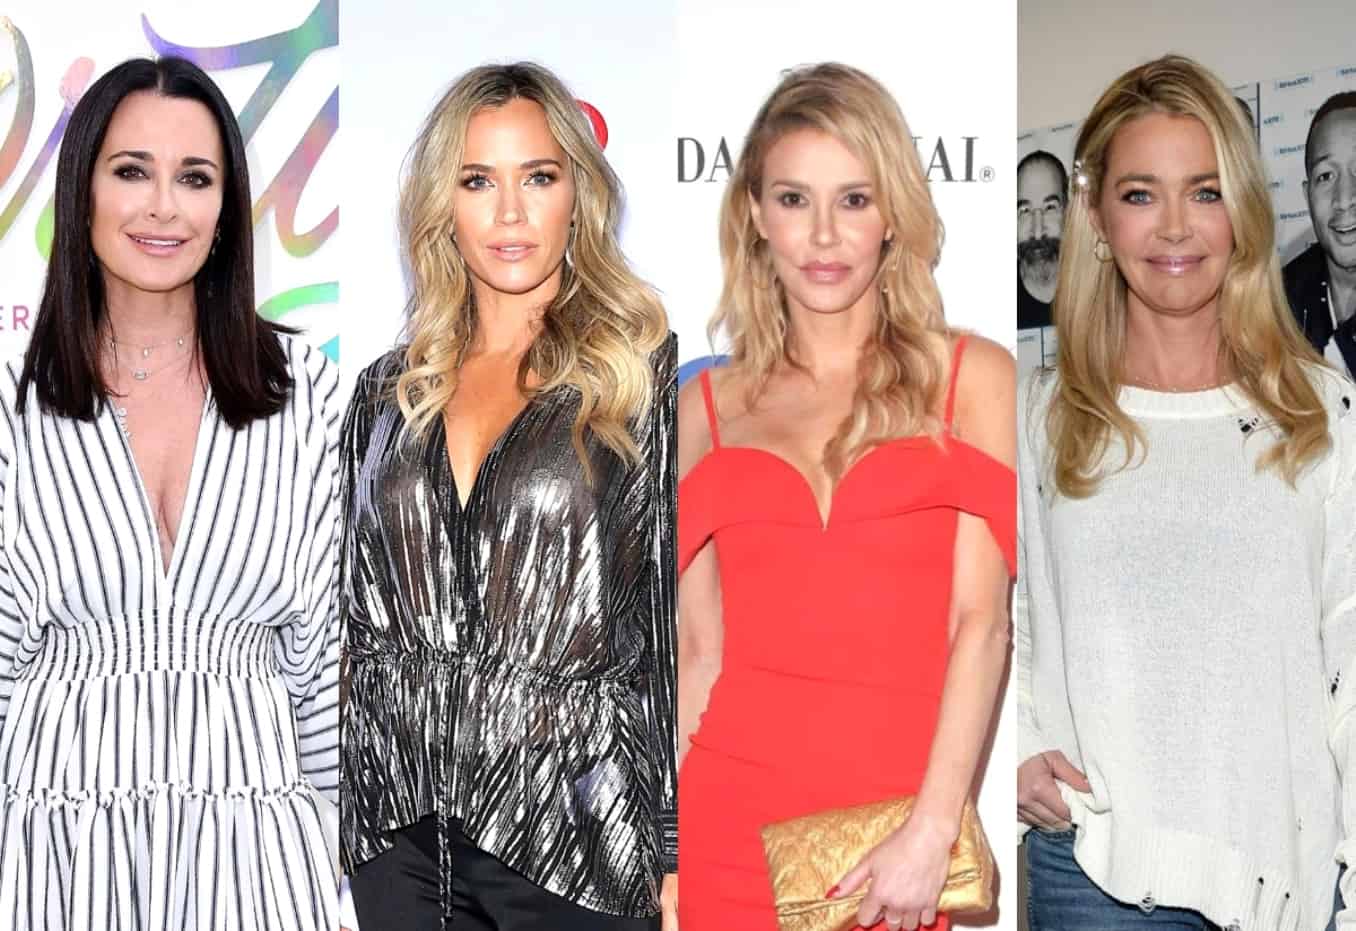 RHOBH's Teddi and Kyle Explain Why They Believe Brandi Glanville is Not Lying About Her Alleged Affair With Denise Richards